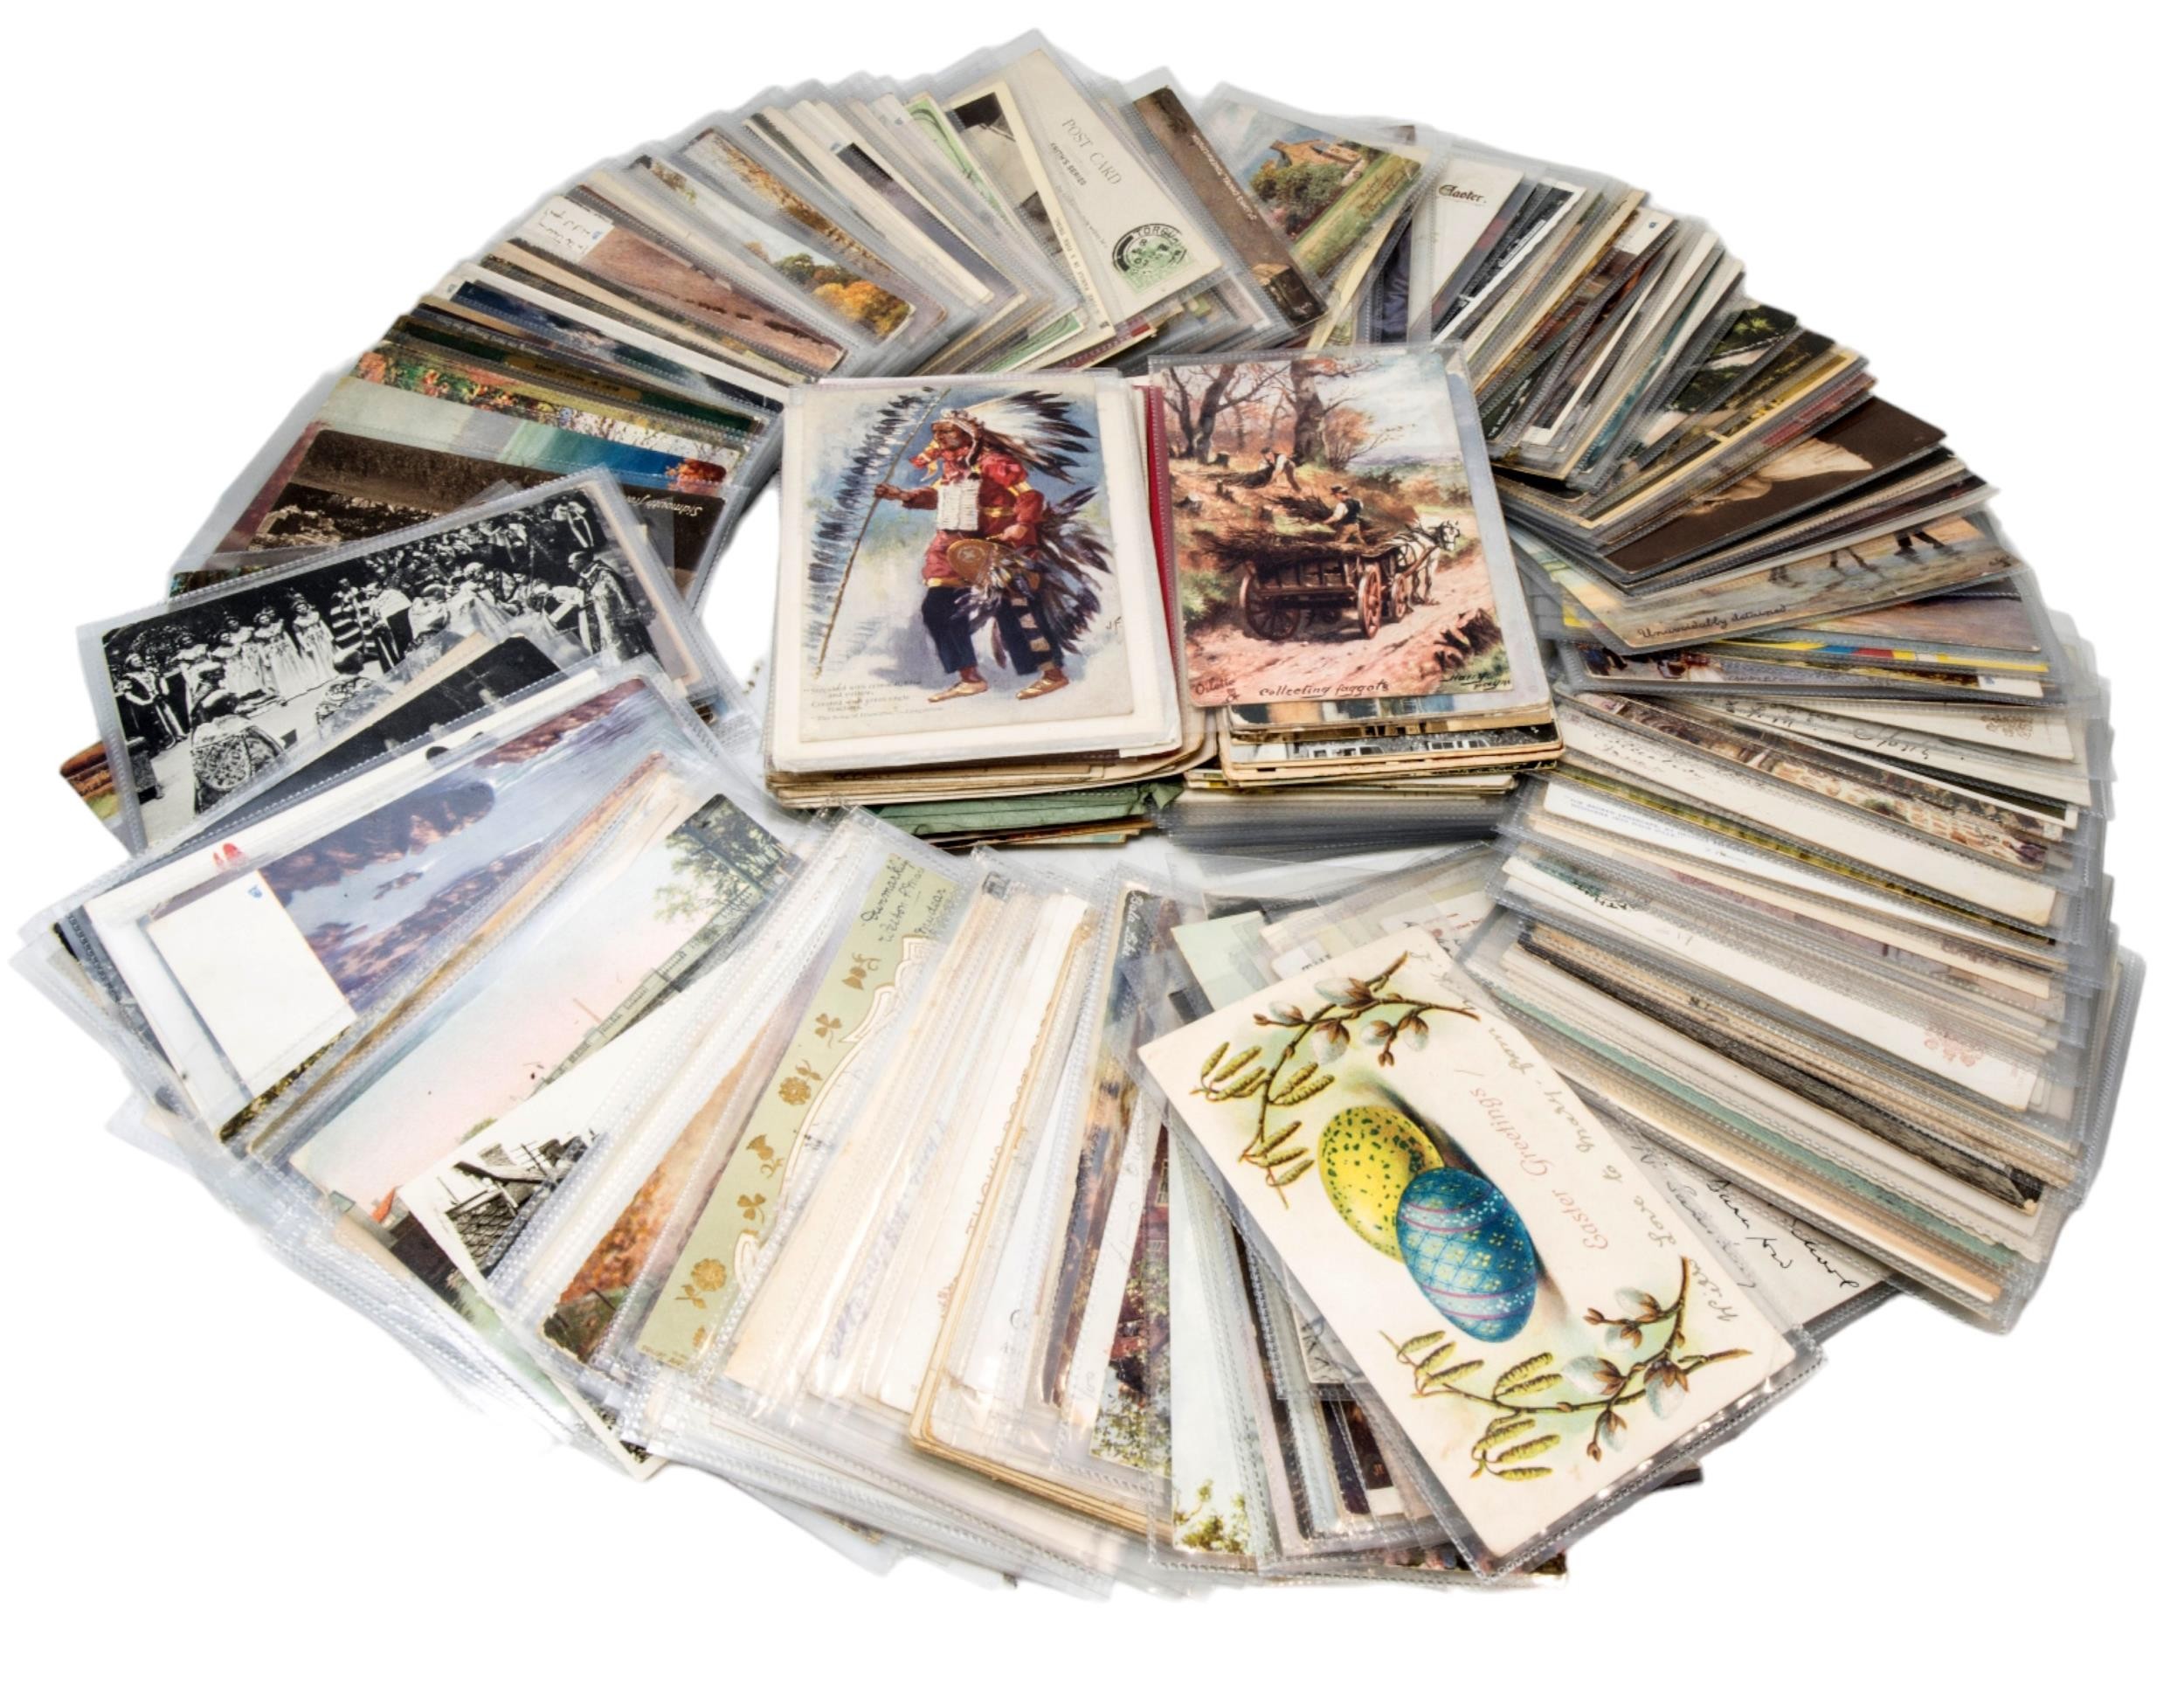 A COLLECTION OF LOOSE POSTCARDS in plastic wallets including Tuck’s Greetings Cards. A lot.